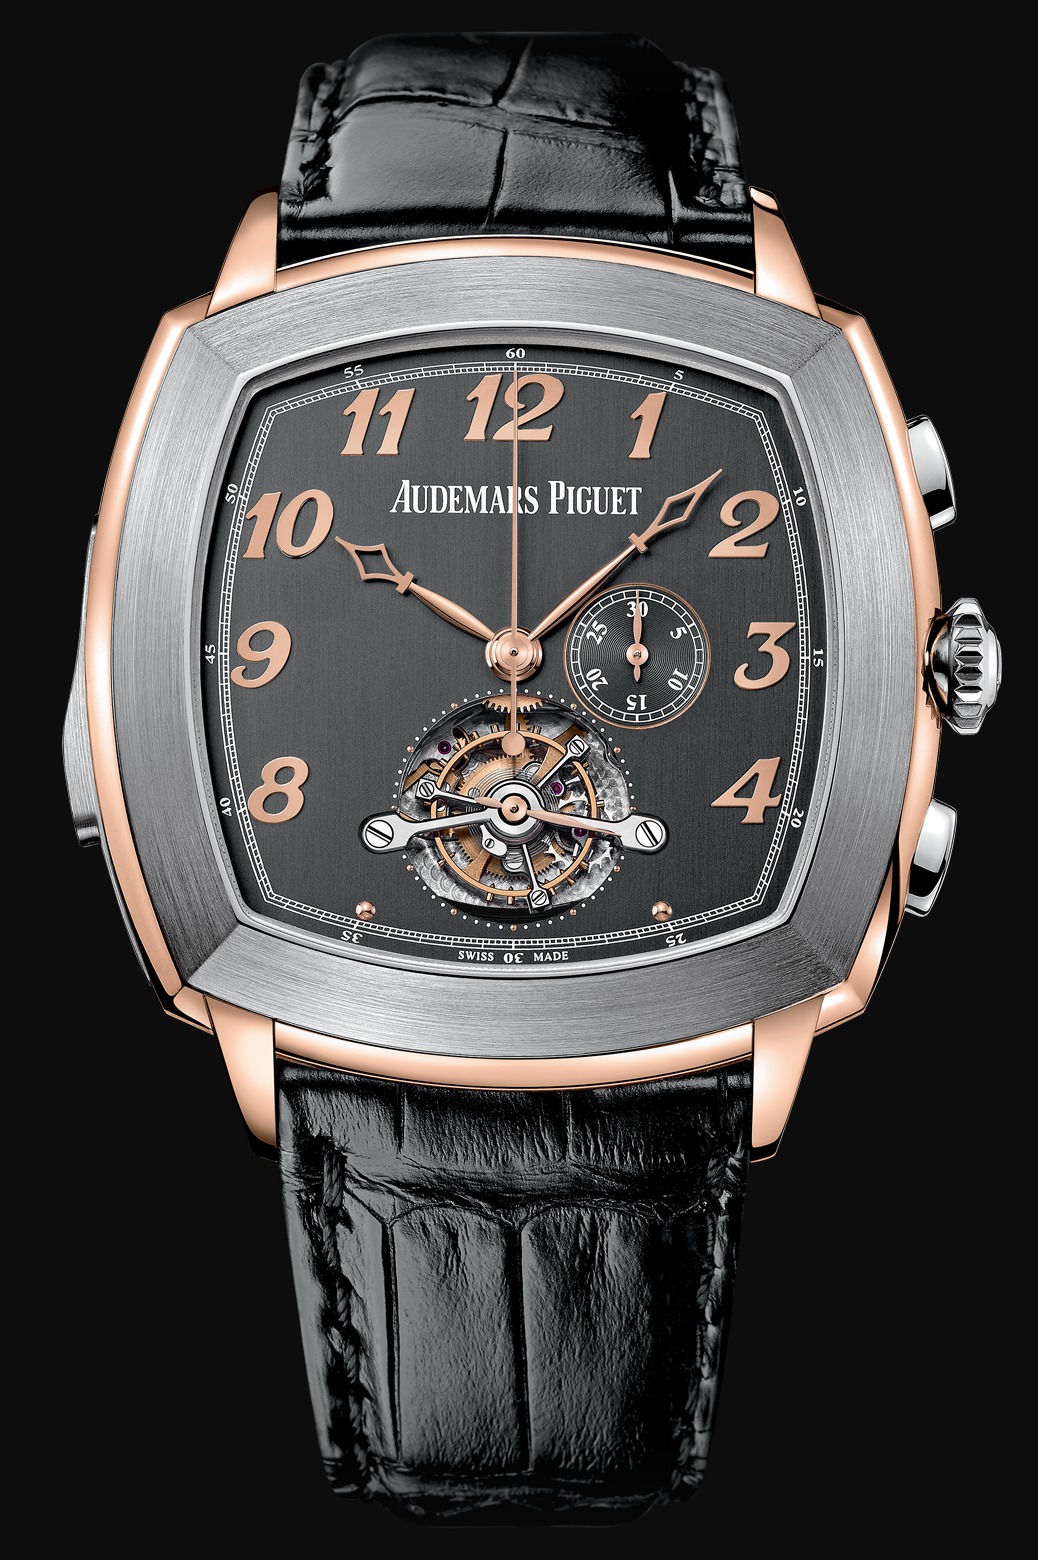 Audemars Piguet Tradition Minute Repeater Tourbillon Chronograph Pink Gold and White Gold watch REF: 26564RC.OO.D002CR.01